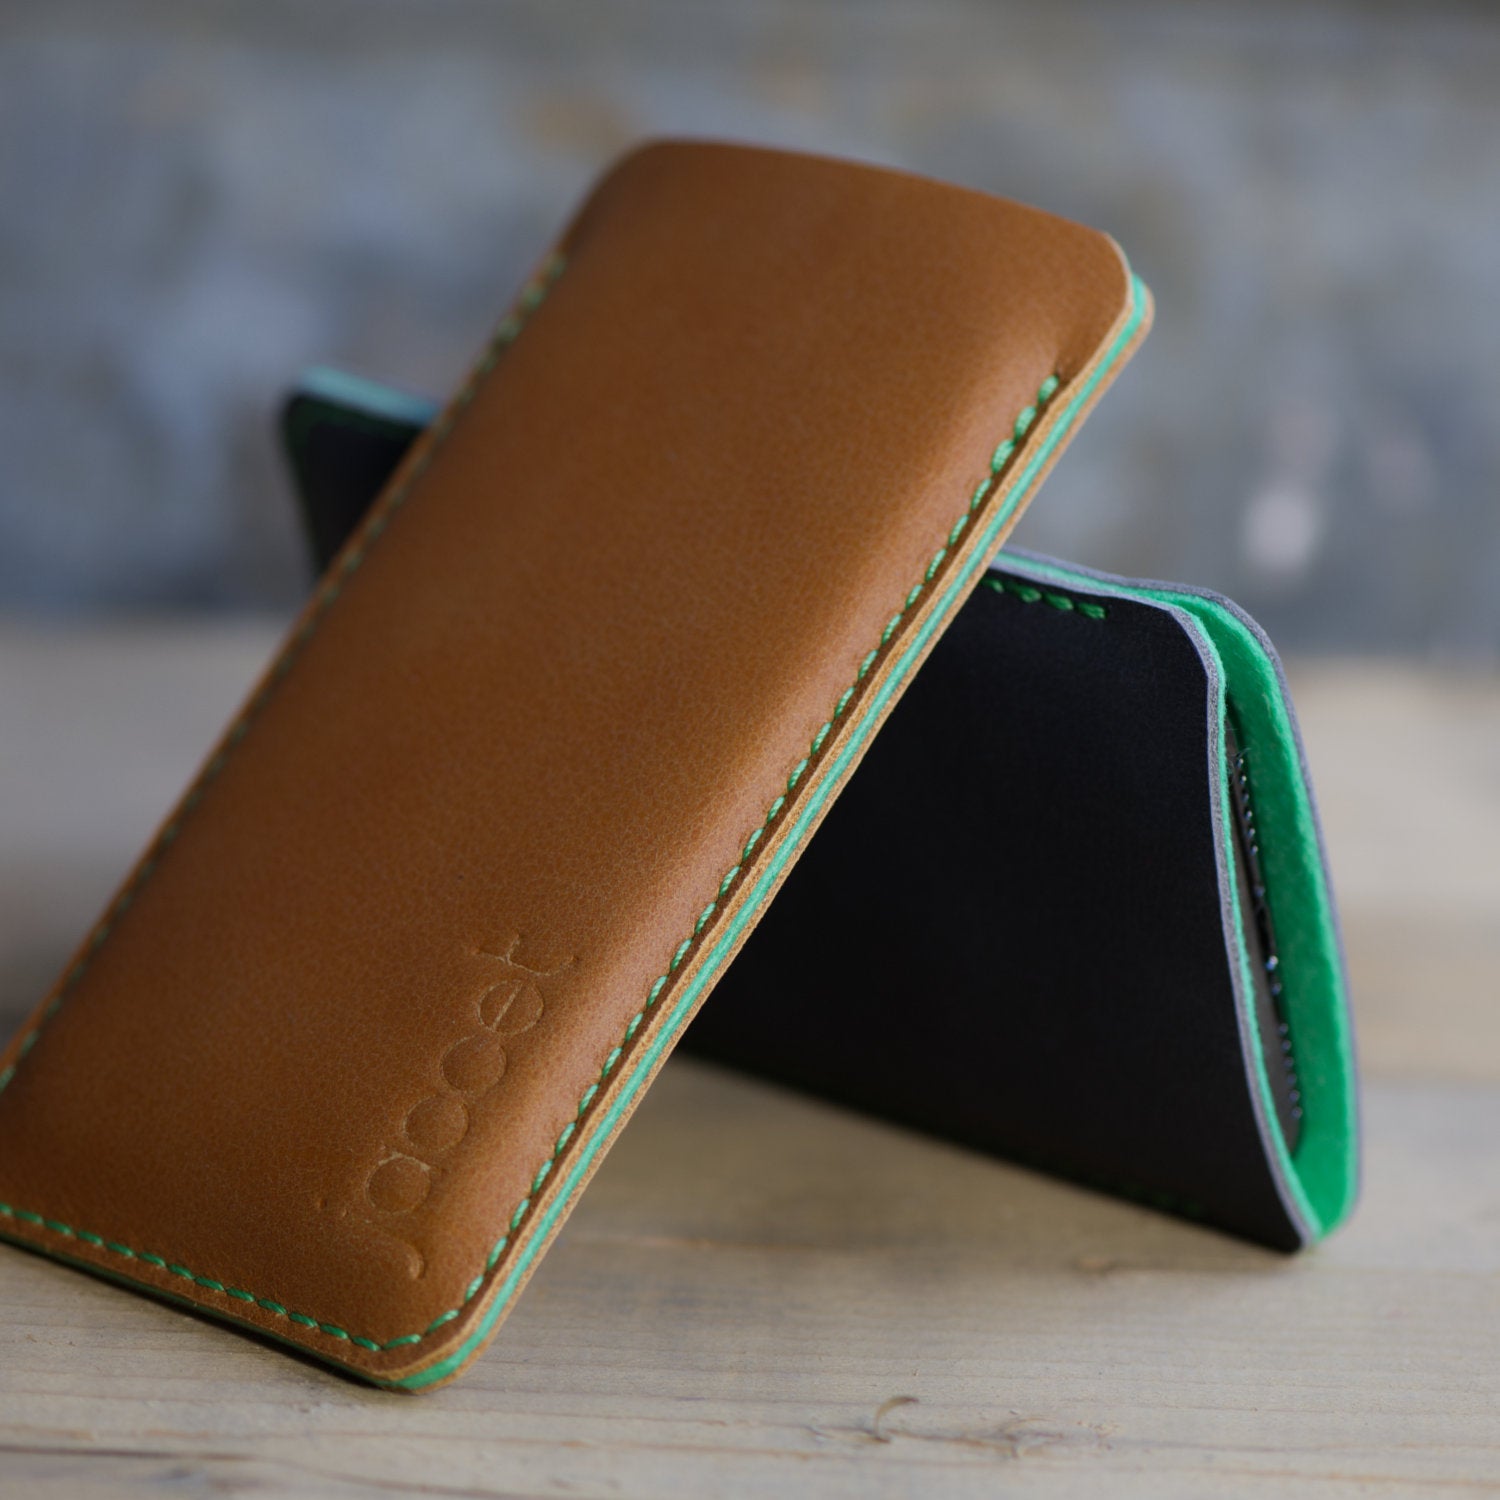 JACCET leather Xiaomi sleeve - Cognac color leather with green wool felt - 100% Handmade